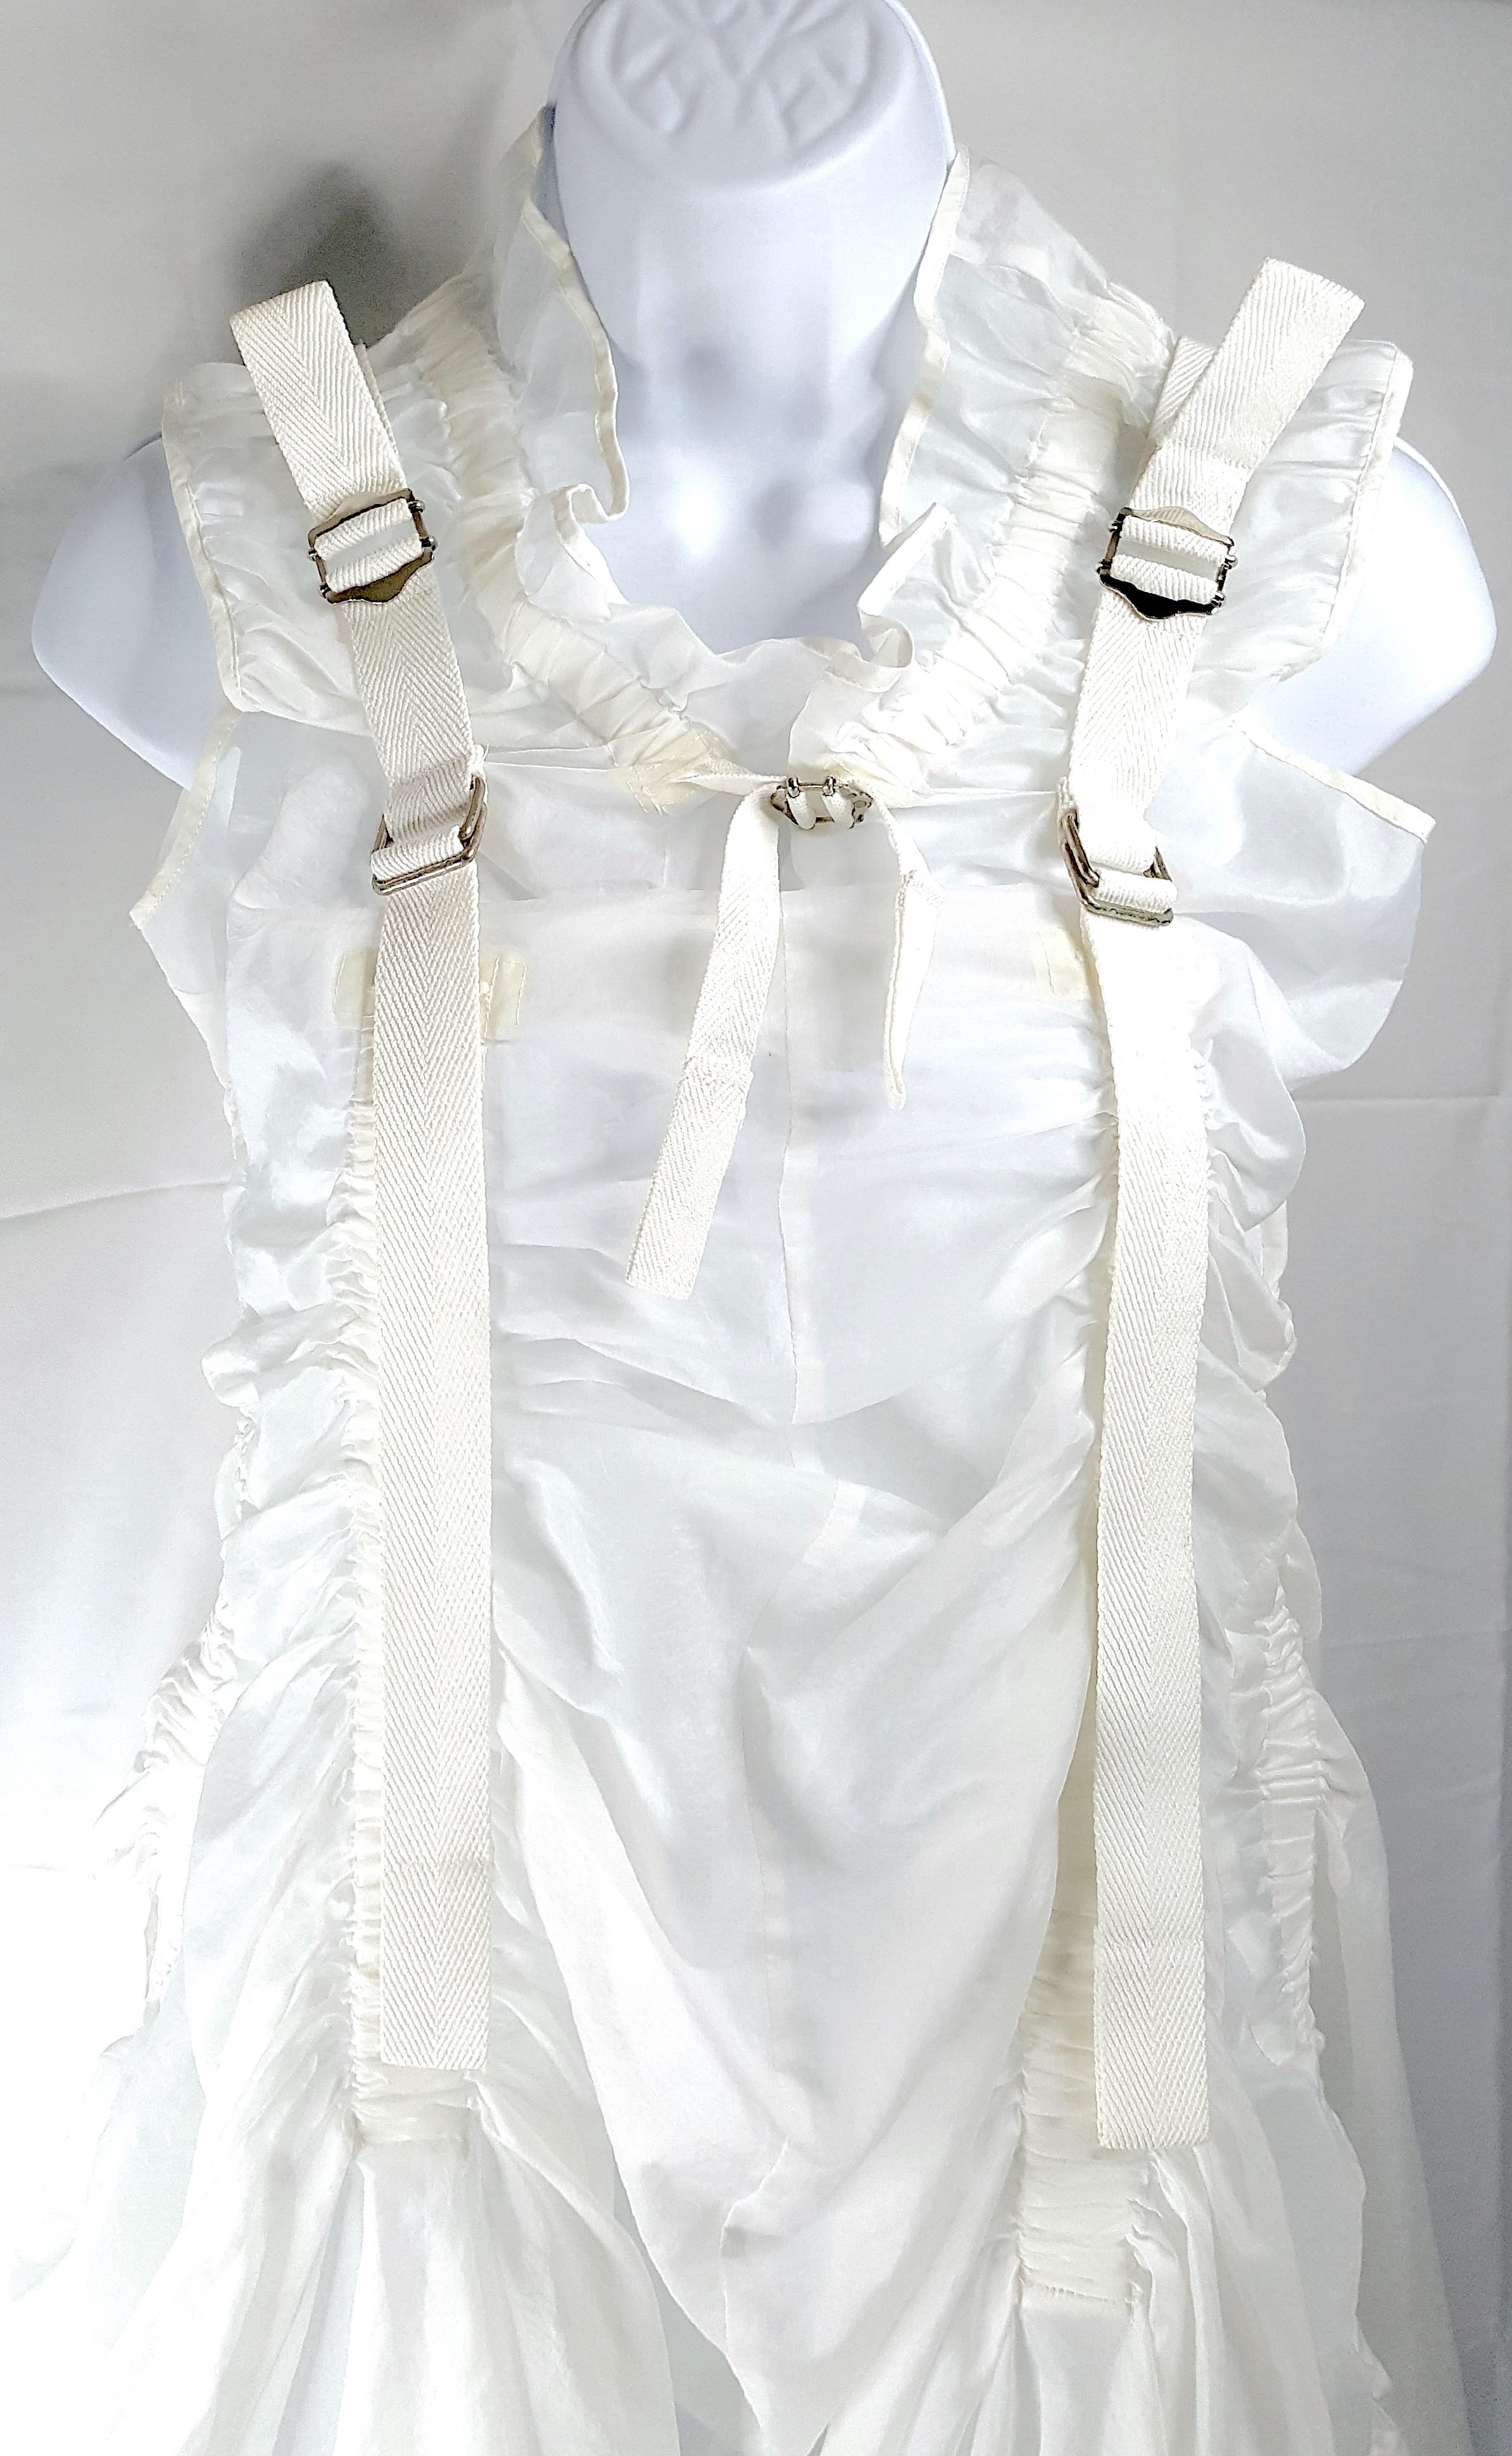 CommeDesGarcons 2003 RunwayLook1 Ruched Parachute Convertible White Dress Gown In Excellent Condition For Sale In Chicago, IL